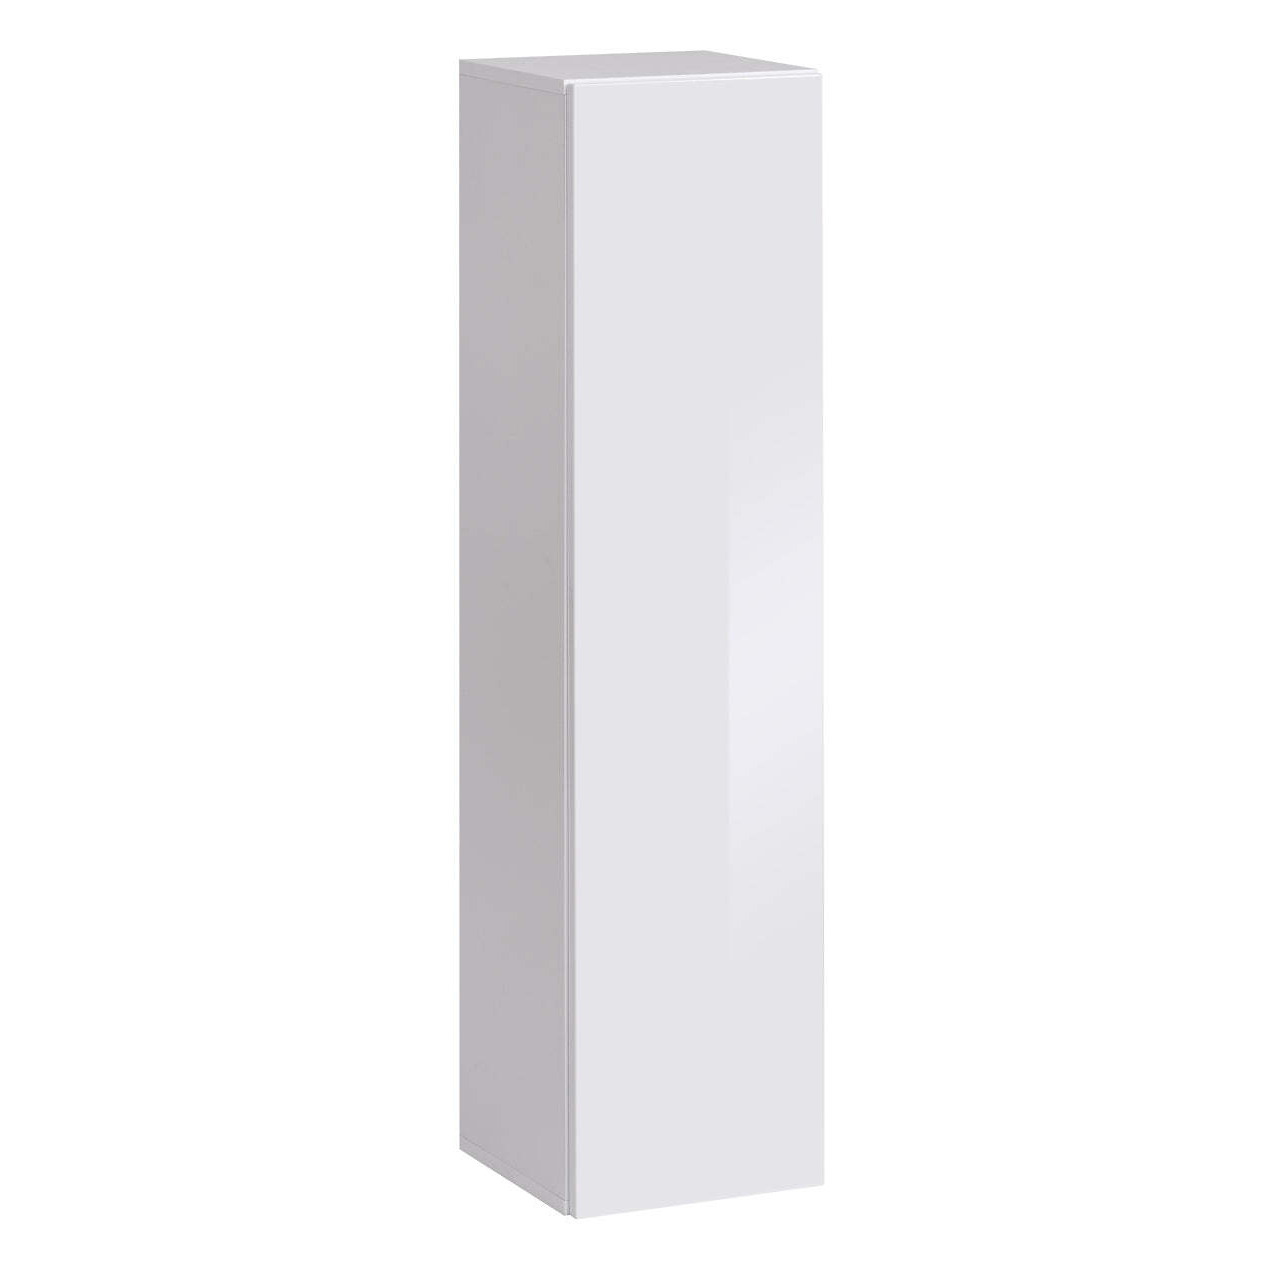 Switch SW2 Tall Cabinet 30cm - White 30cm - image 1